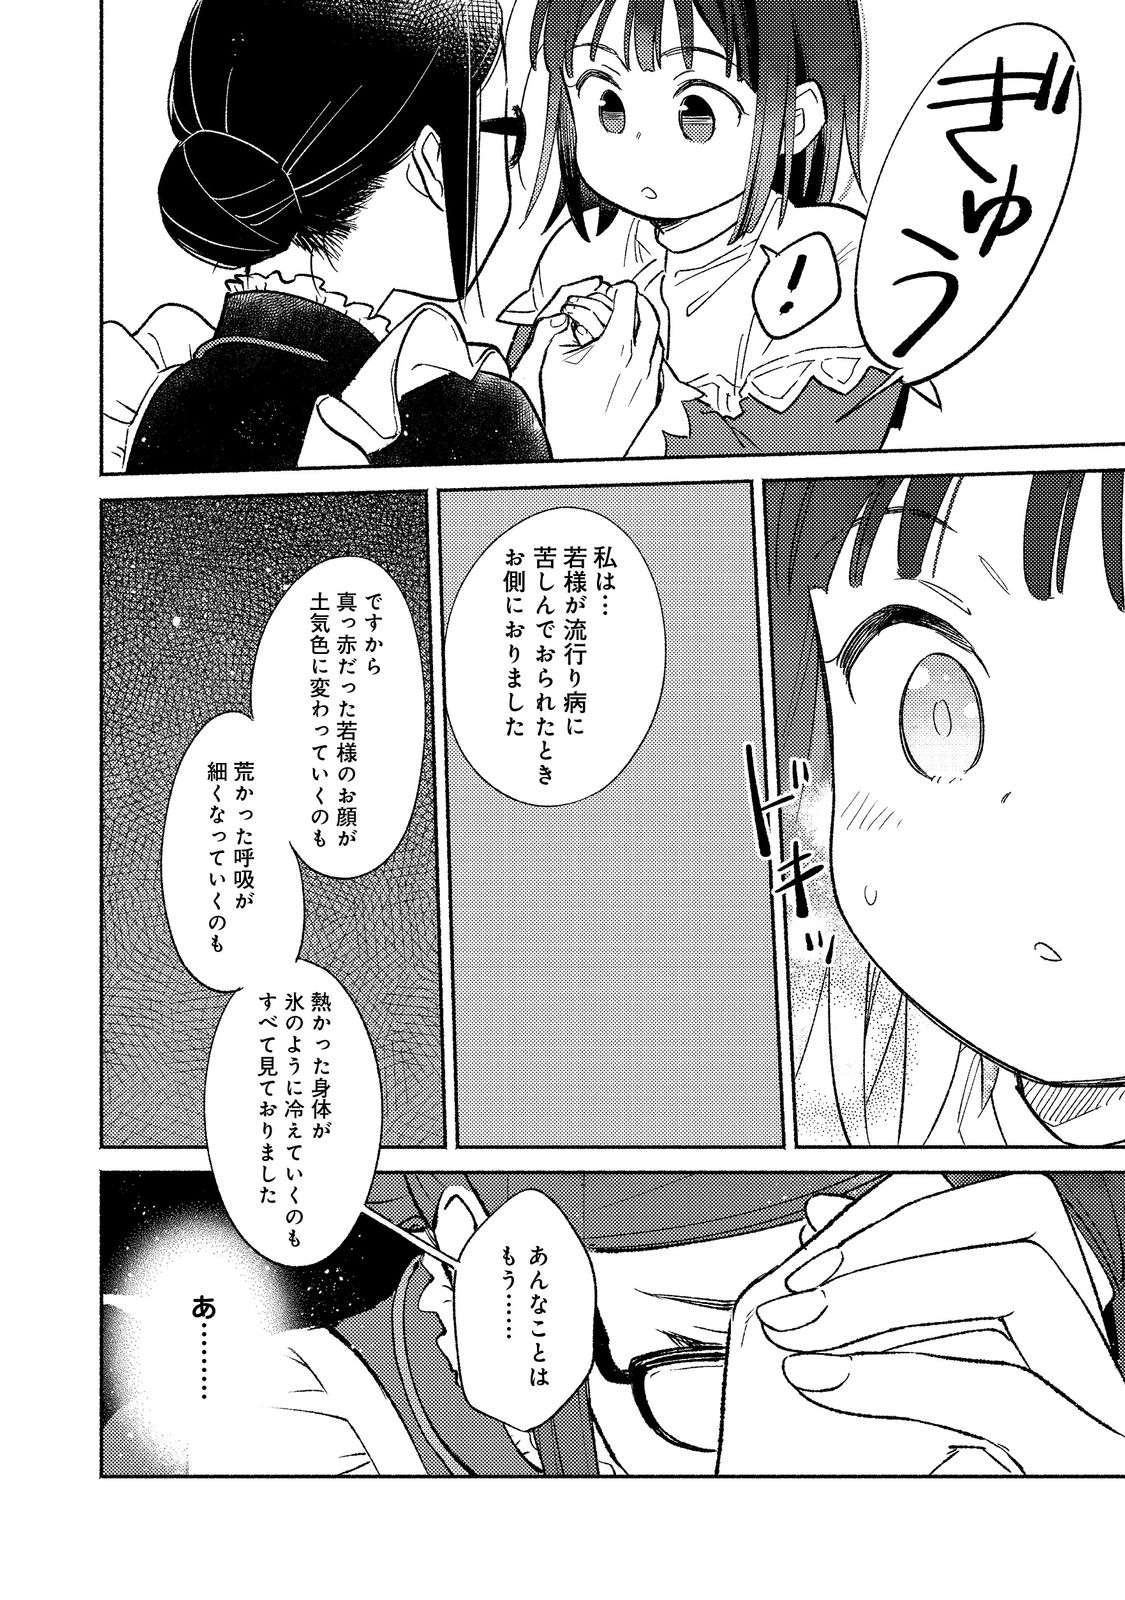 I’m the White Pig Nobleman 第16.2話 - Page 12